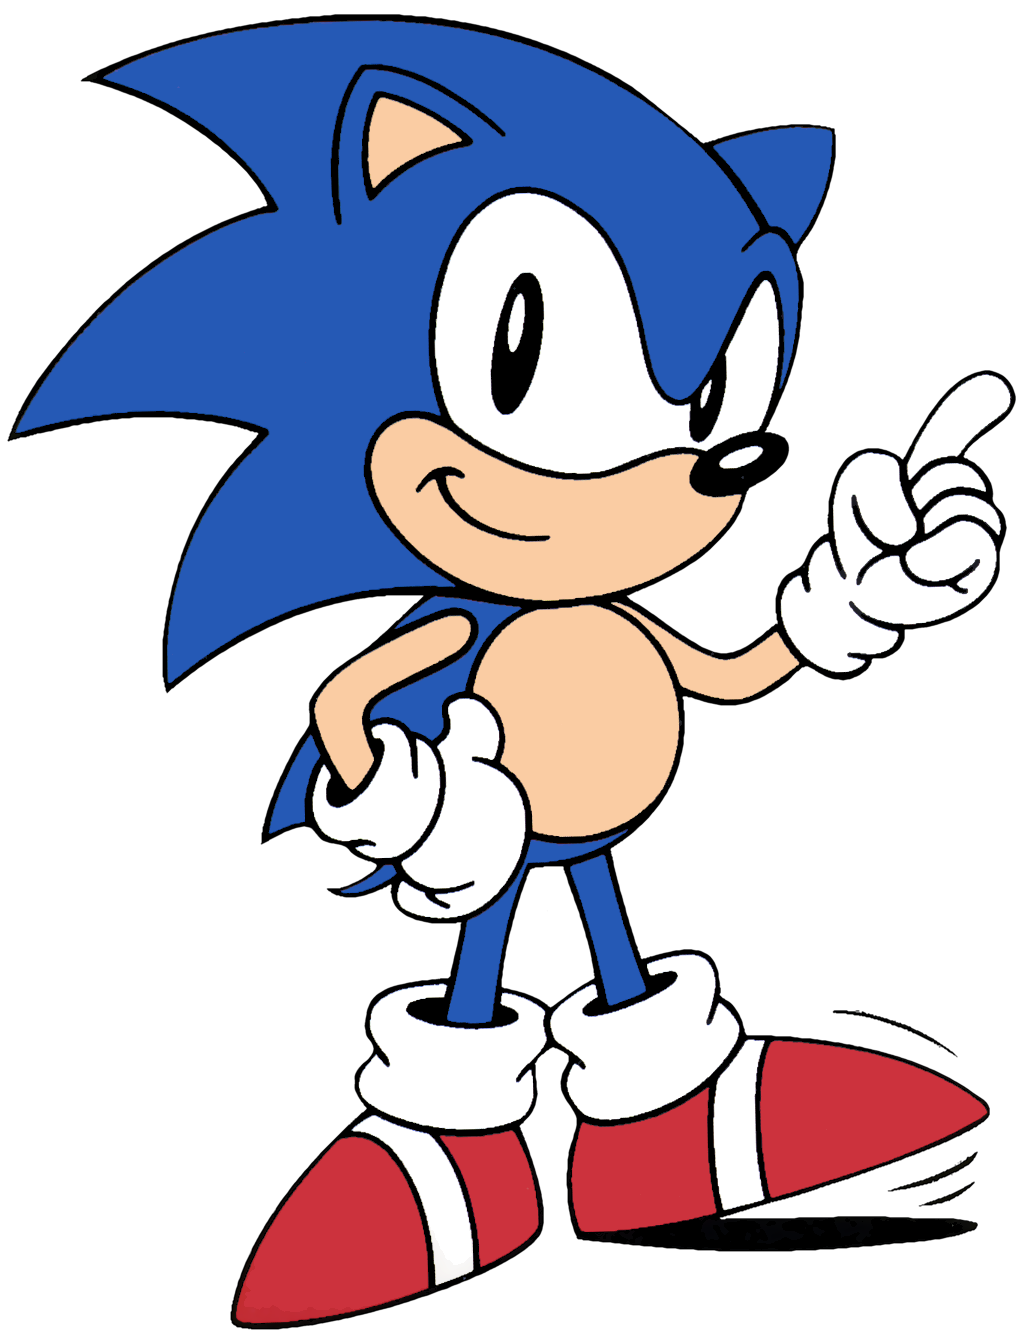 sonic-the-hedgehog-game-9.png